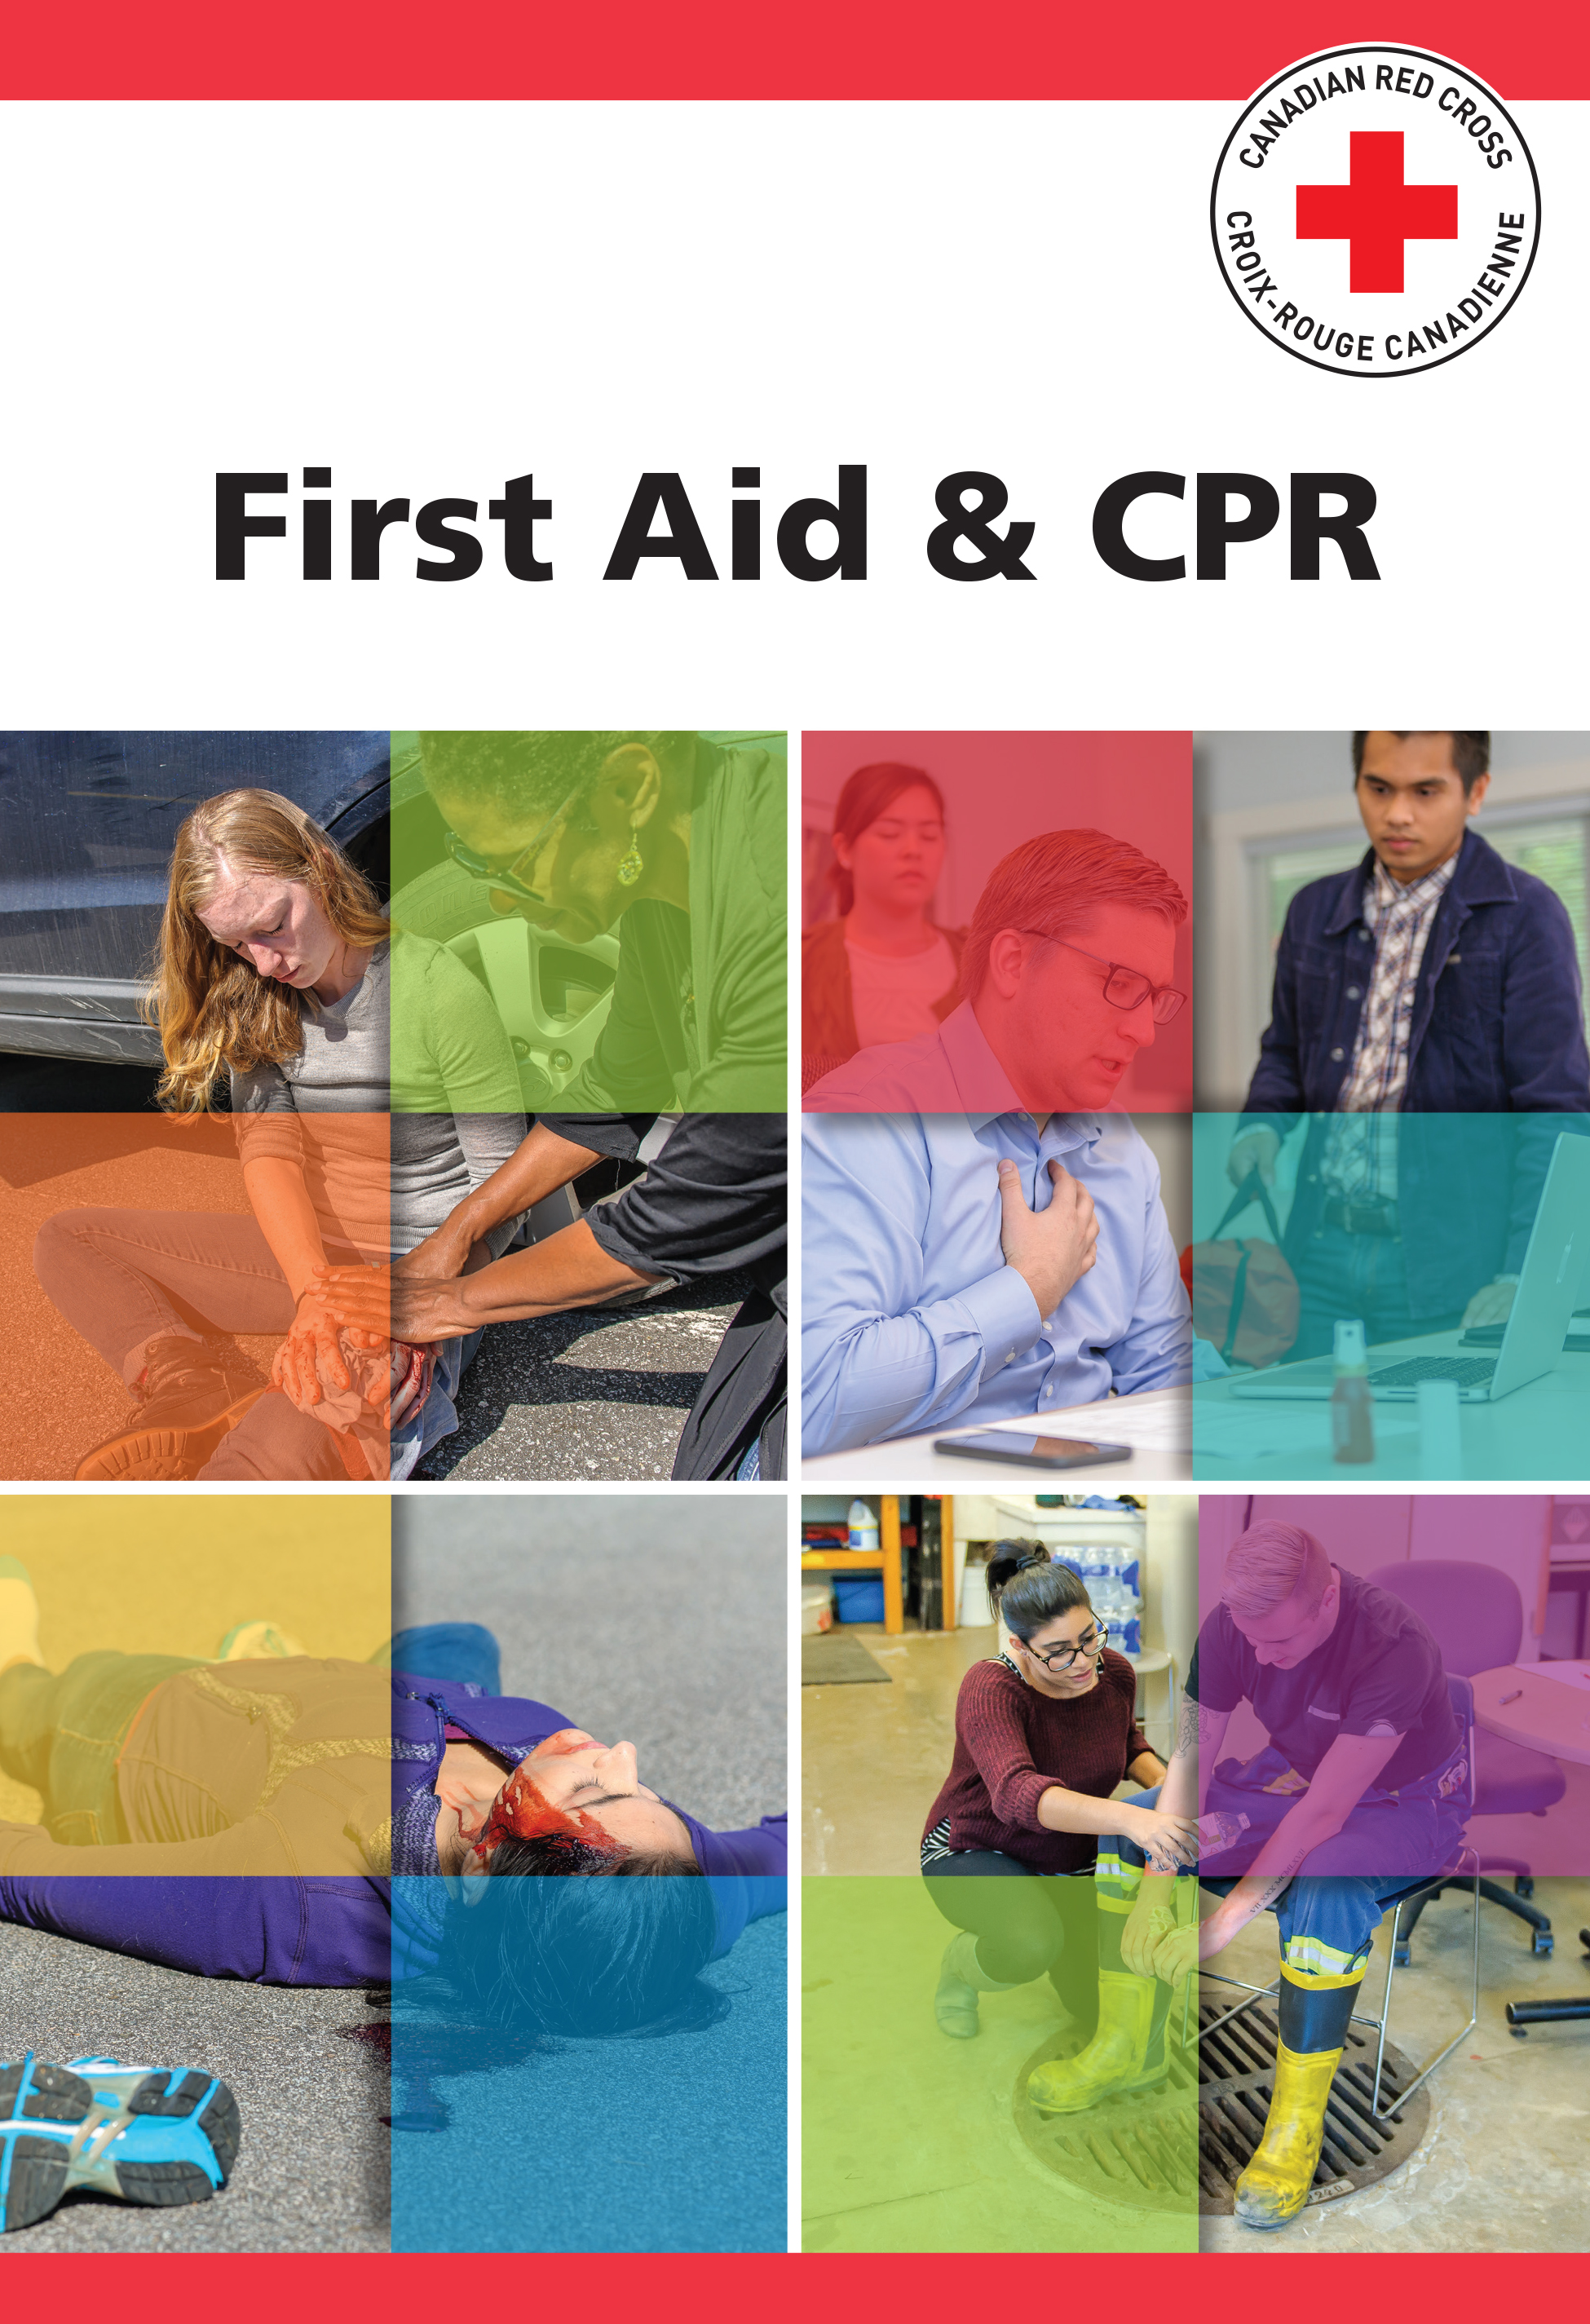 First Aid Course Materials for Marine Basic First Aid and CPR Level C (Blended) in Burnaby